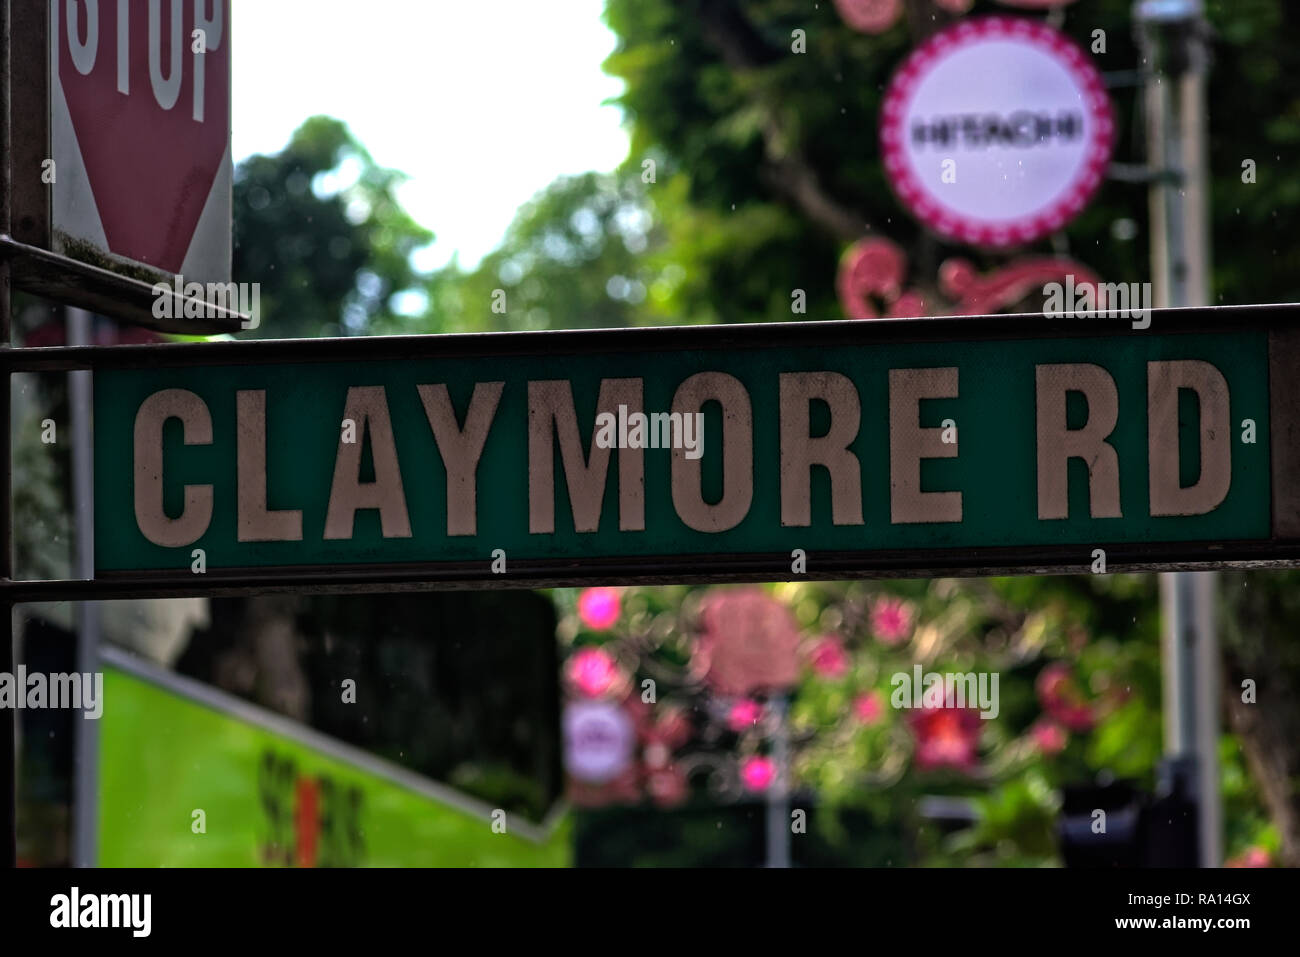 Street sign for Claymore Road, Singapore with stop sign at road junction behind Stock Photo